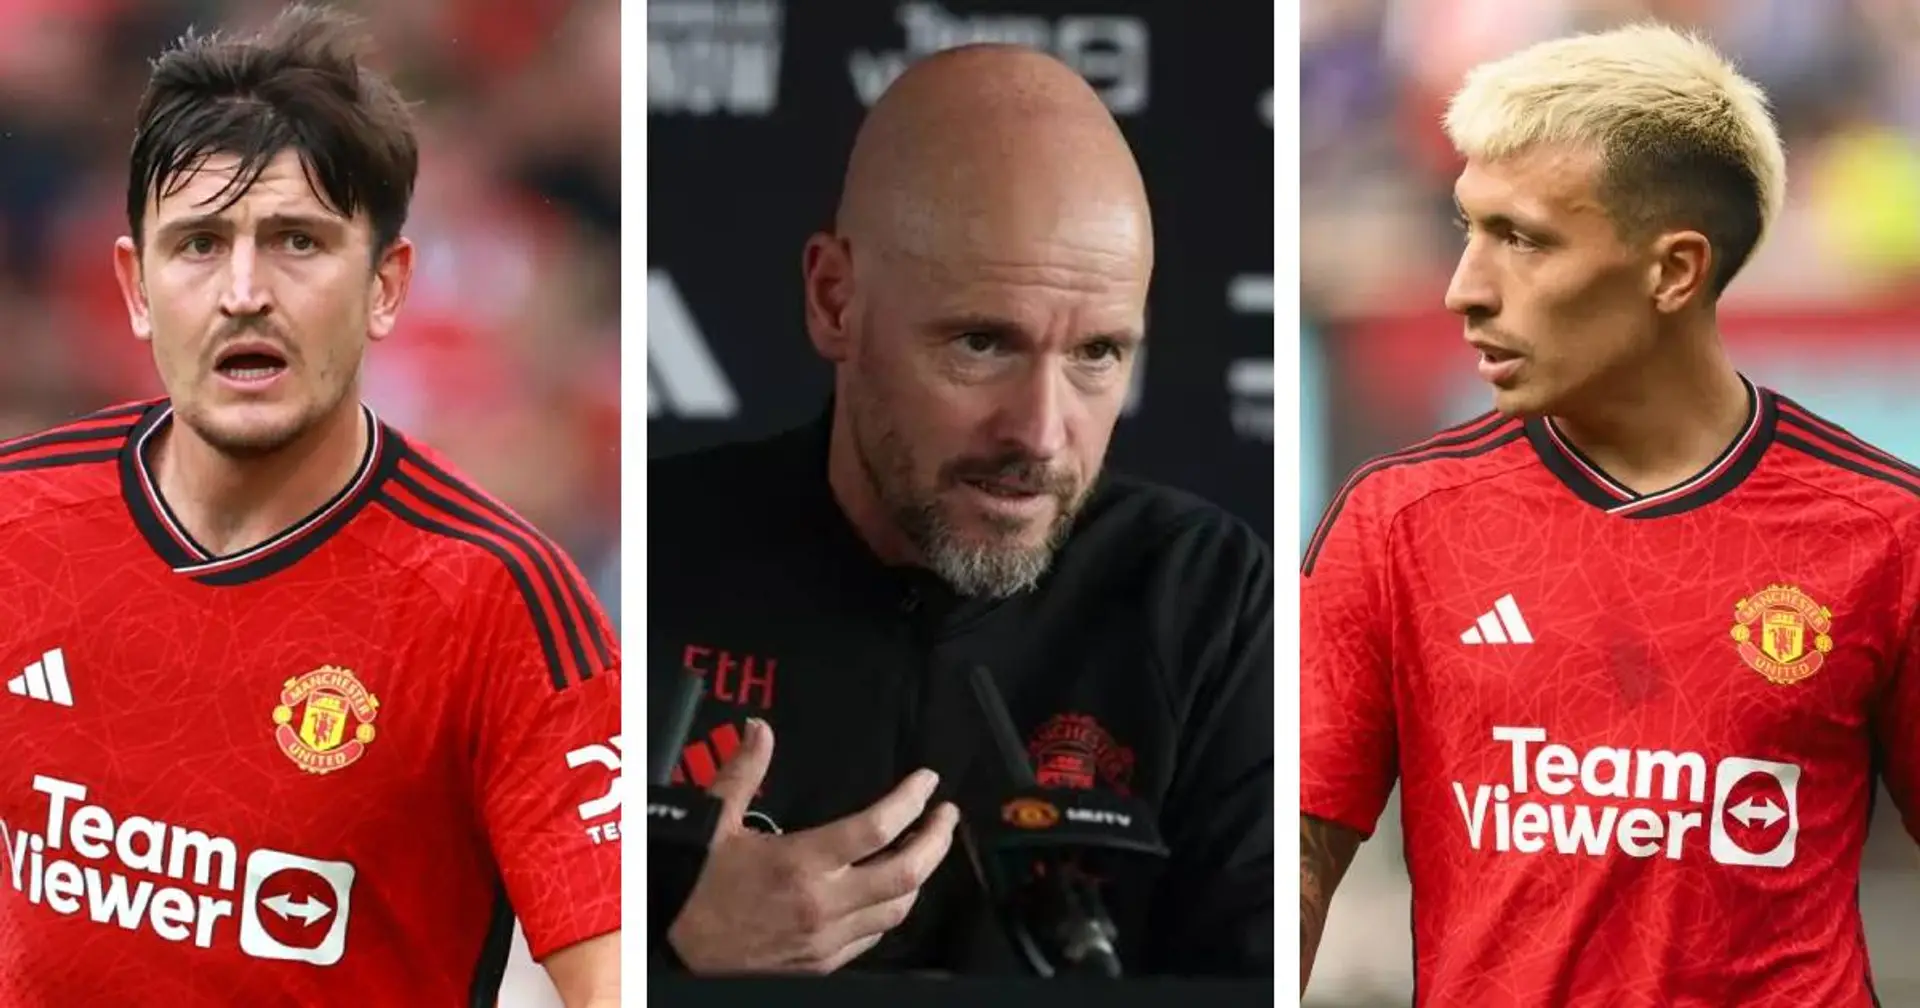 Ten Hag reveals possible return date for Maguire, Martinez & 3 more players